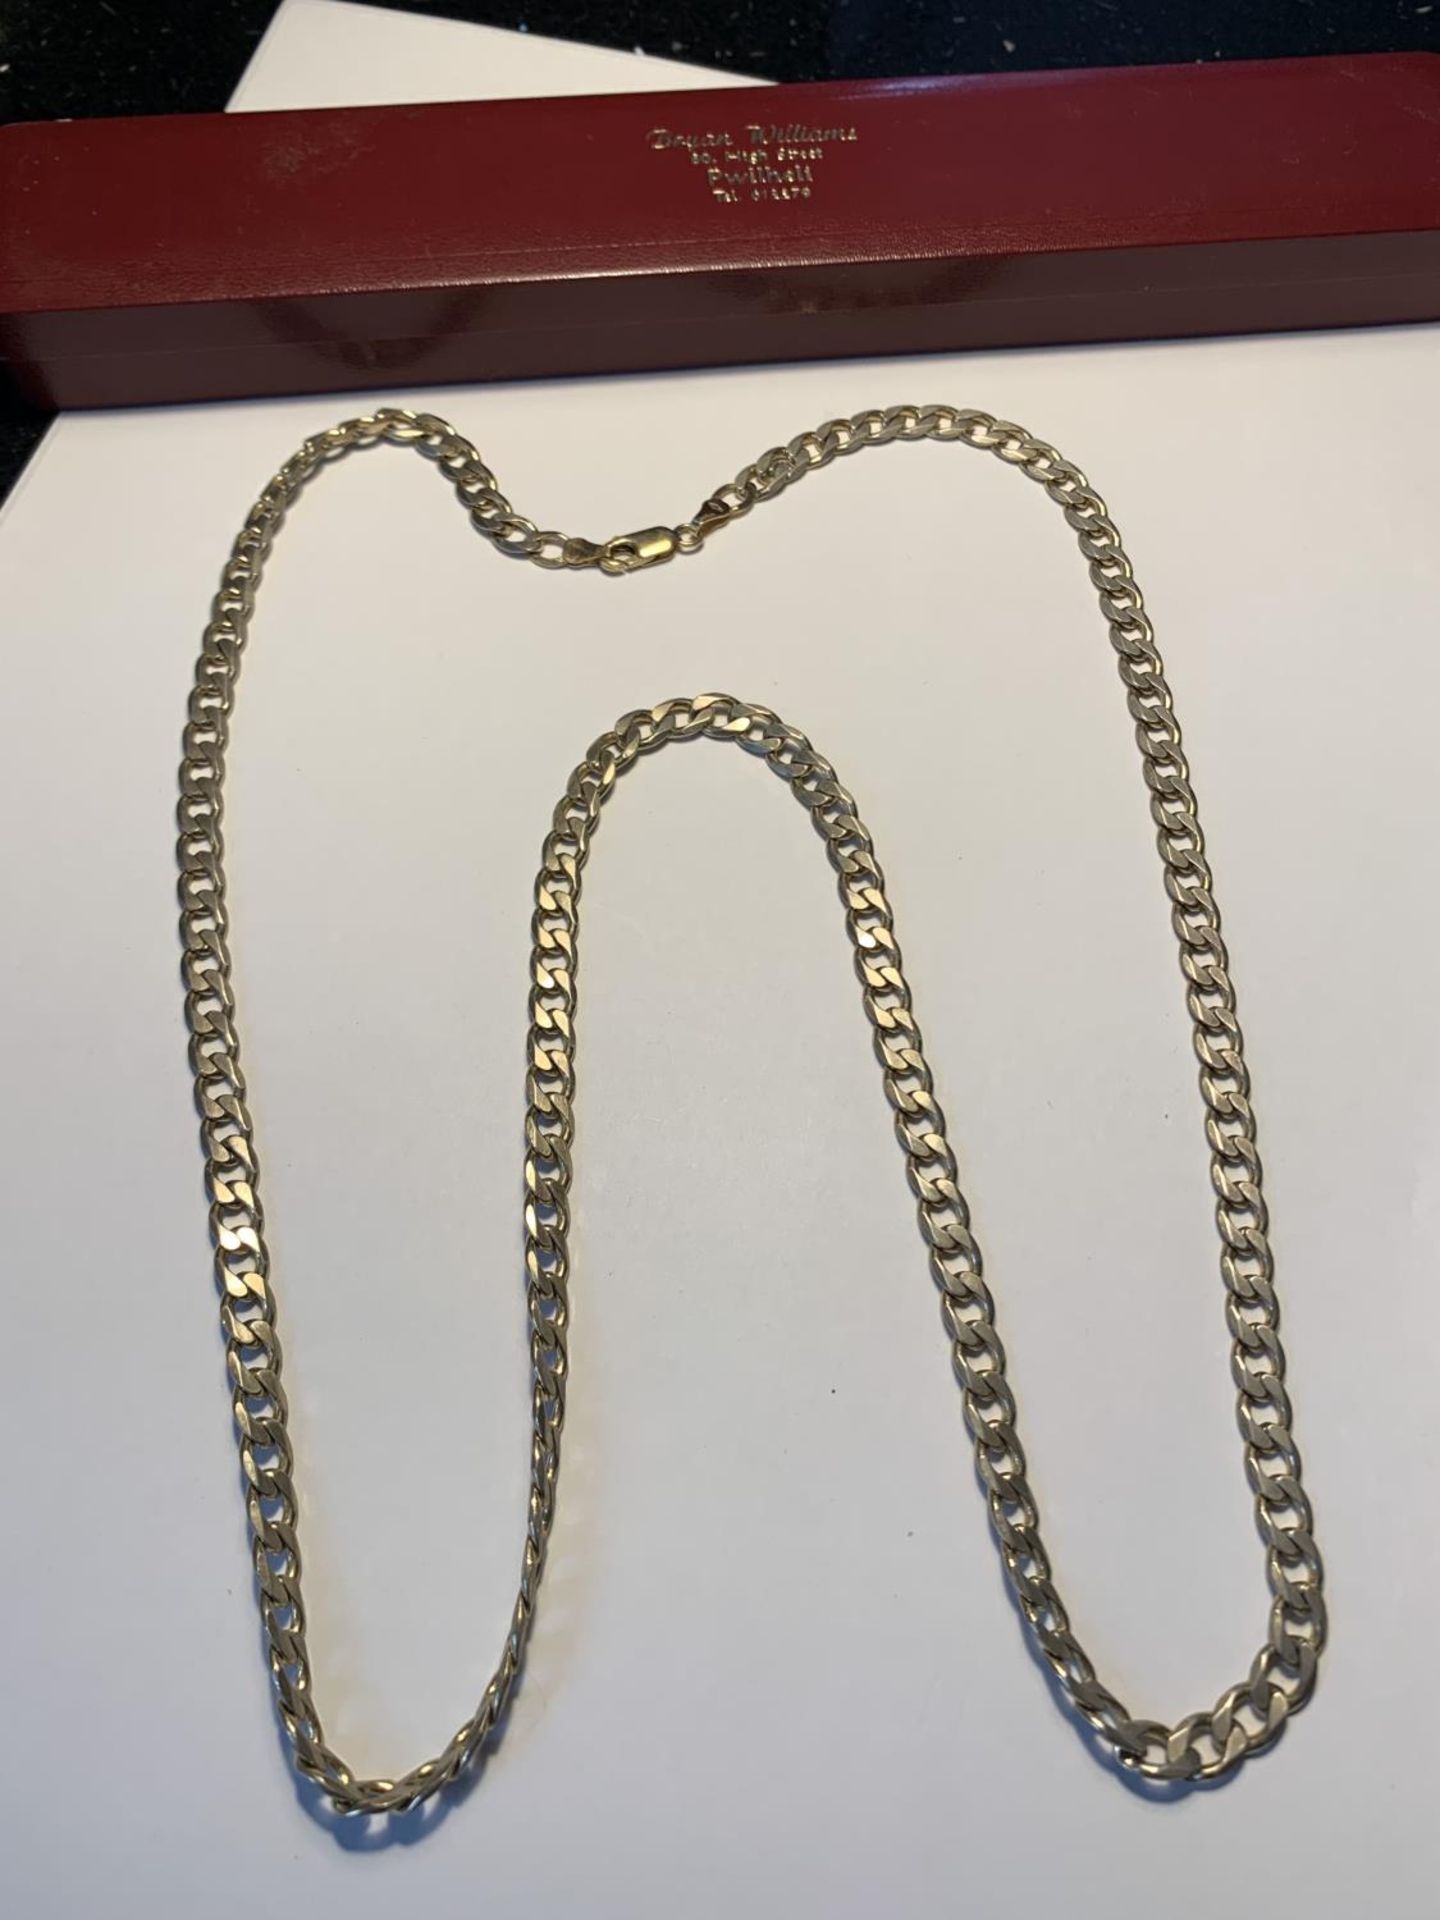 A 9 CARAT GOLD FLAT LINK NECKLACE LENGTH 75 CM GROSS WEIGHT 30.79 GRAMS WITH A PRESENTATION BOX